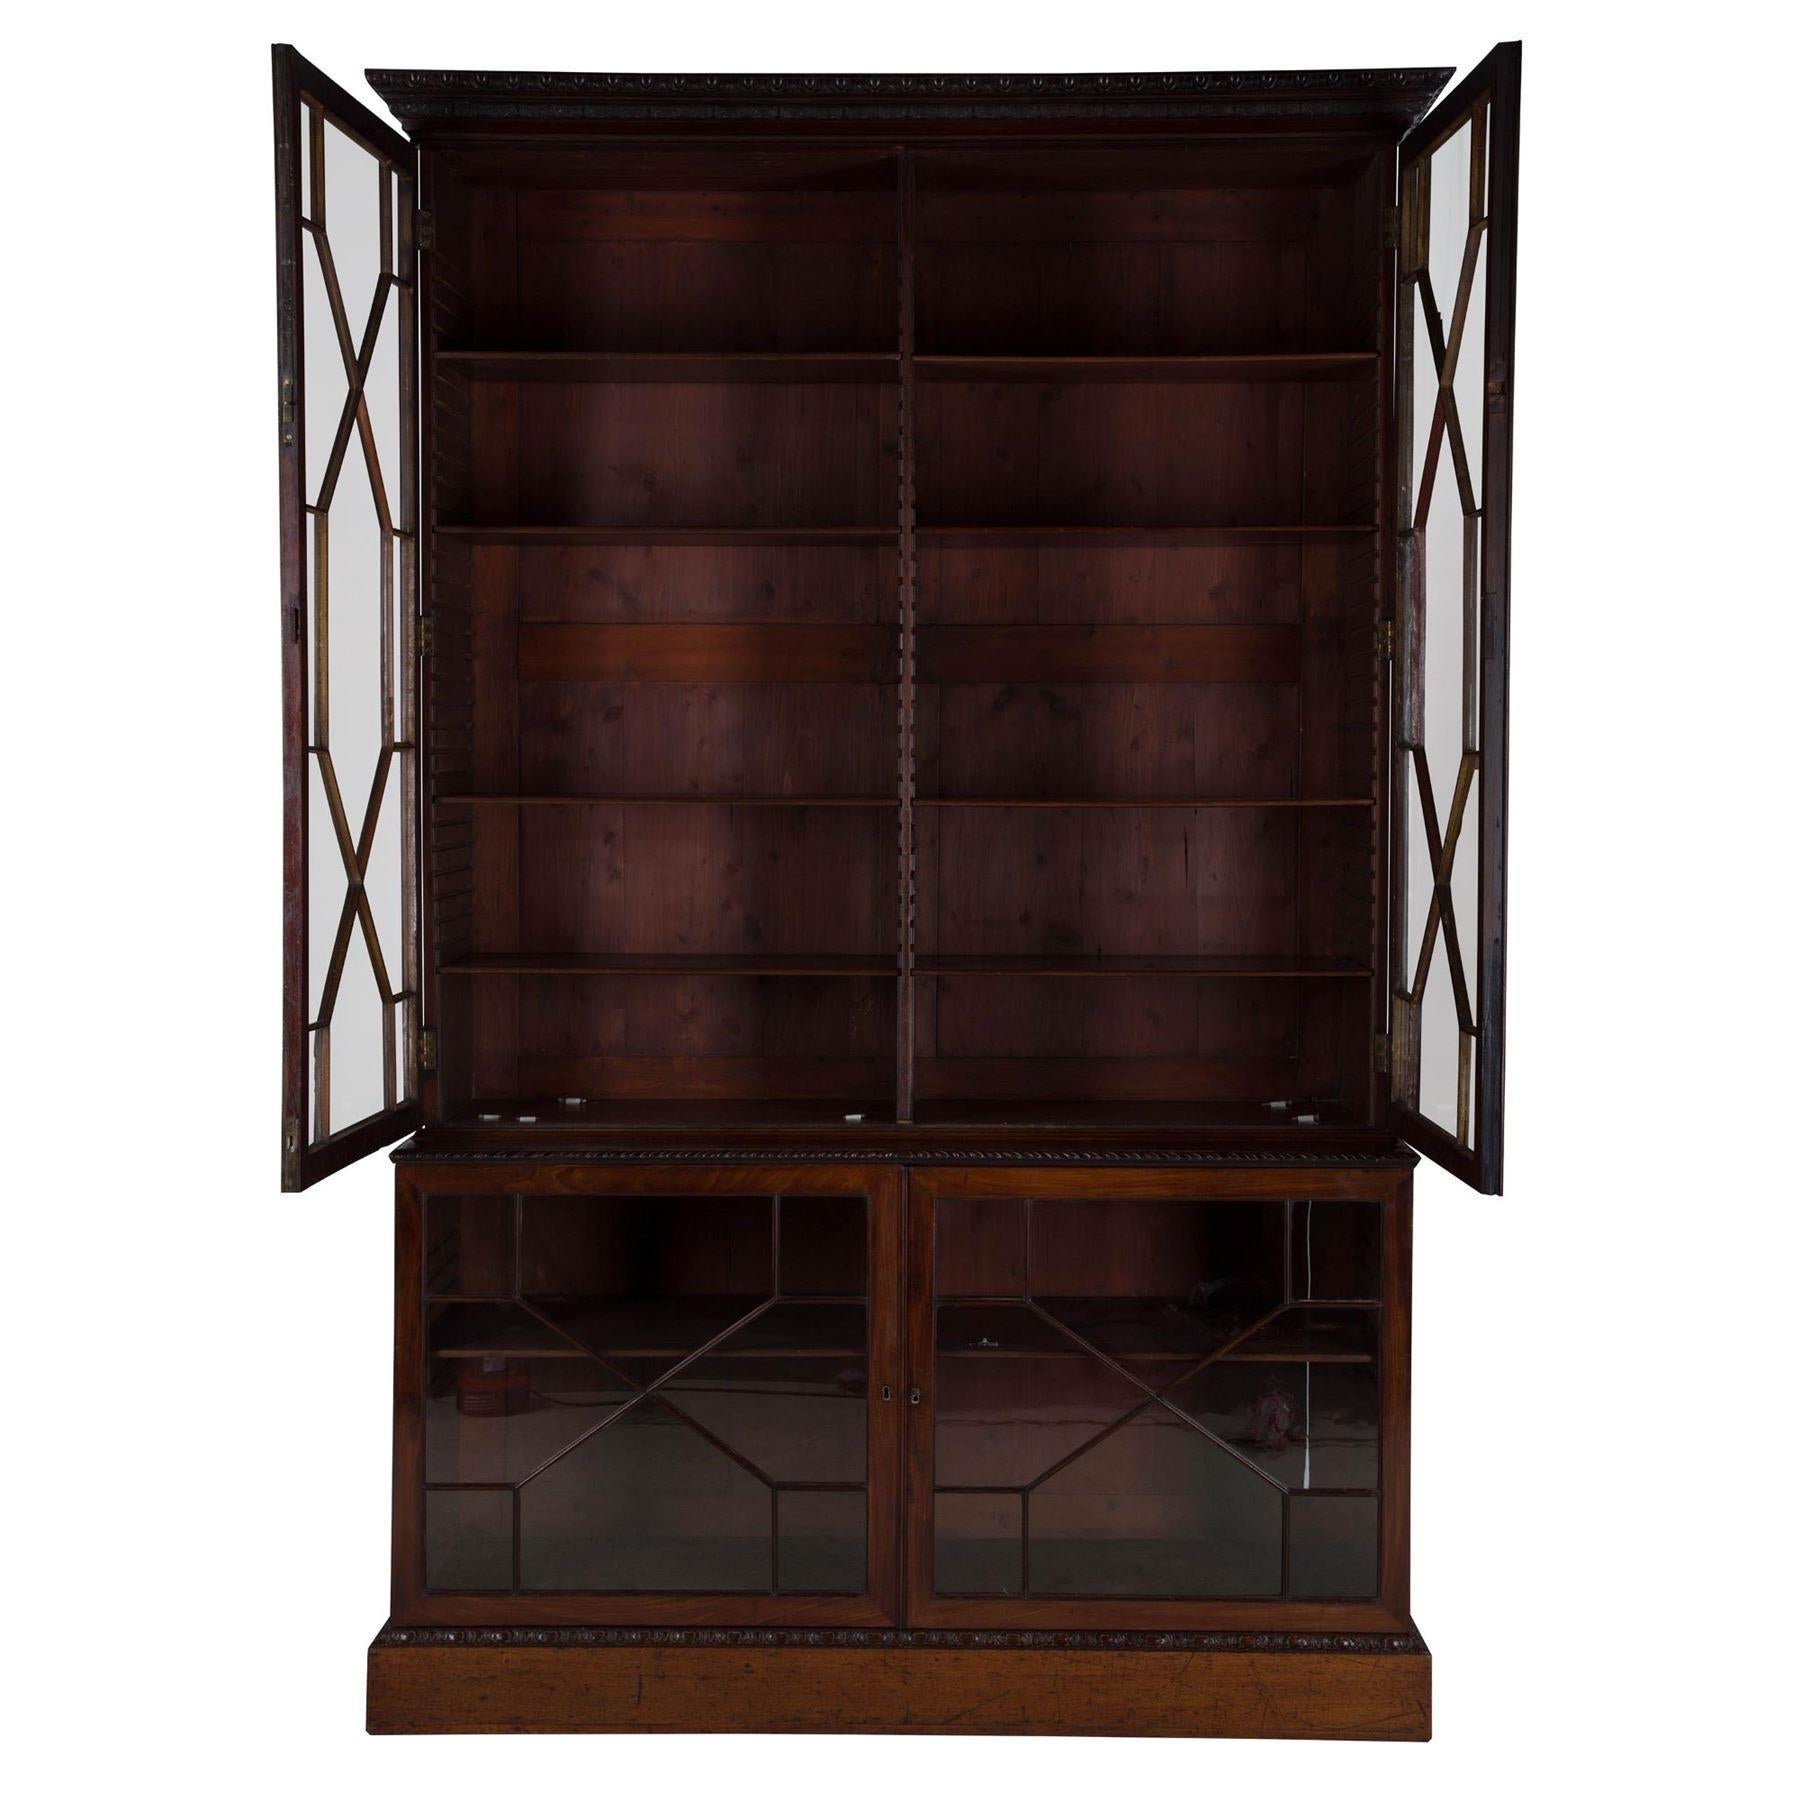 An 18th century Chippendale period mahogany bookcase or display cabinet, with astragal doors and carved moulding.